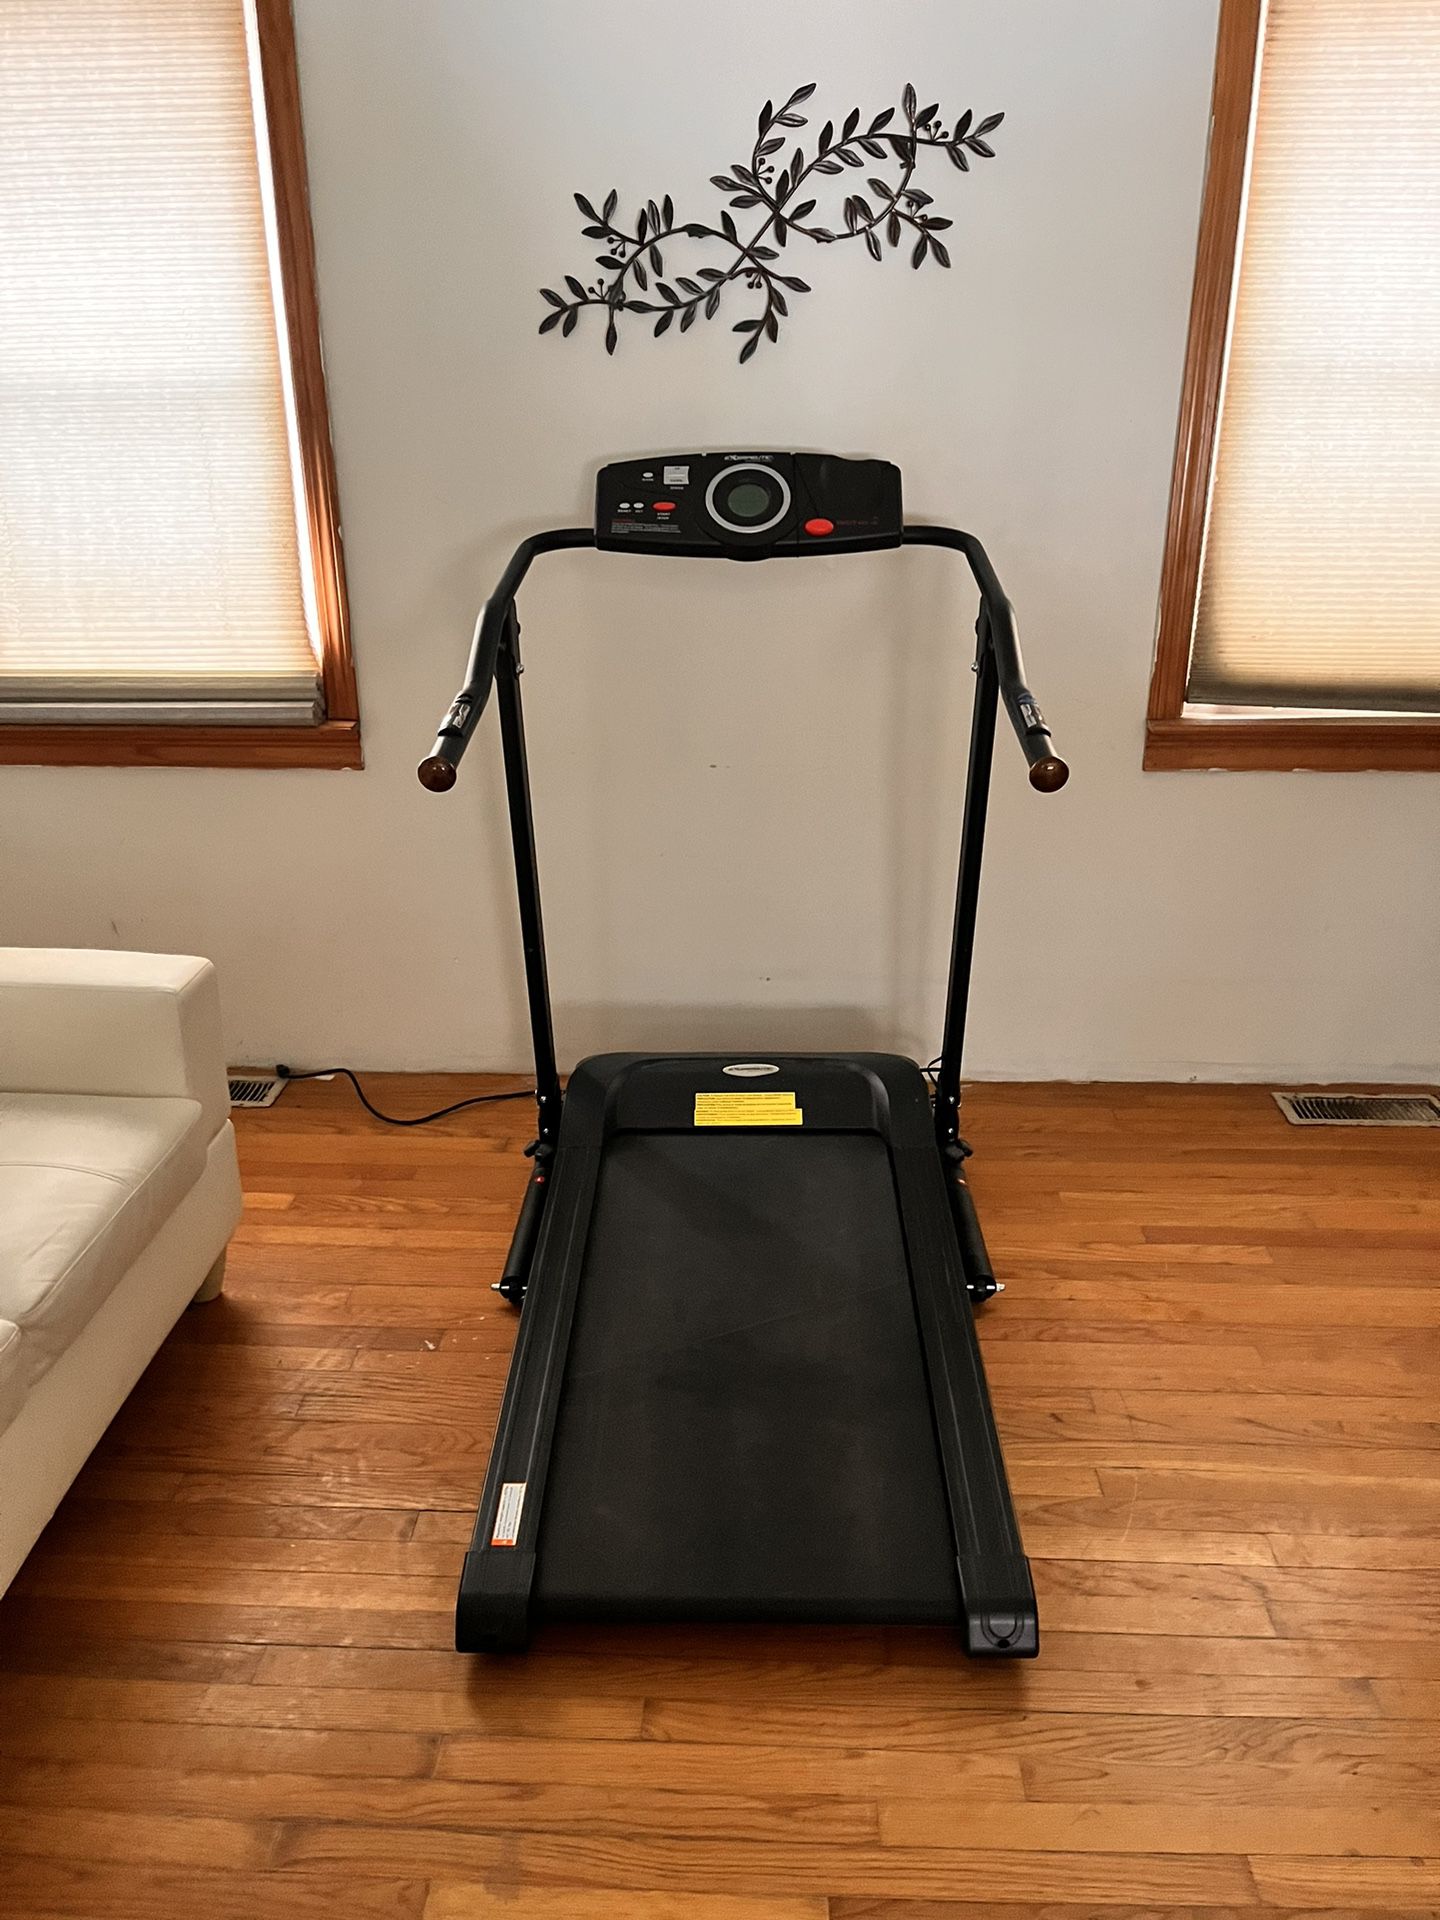 Exerpeutic TF1000 Electric Treadmill 